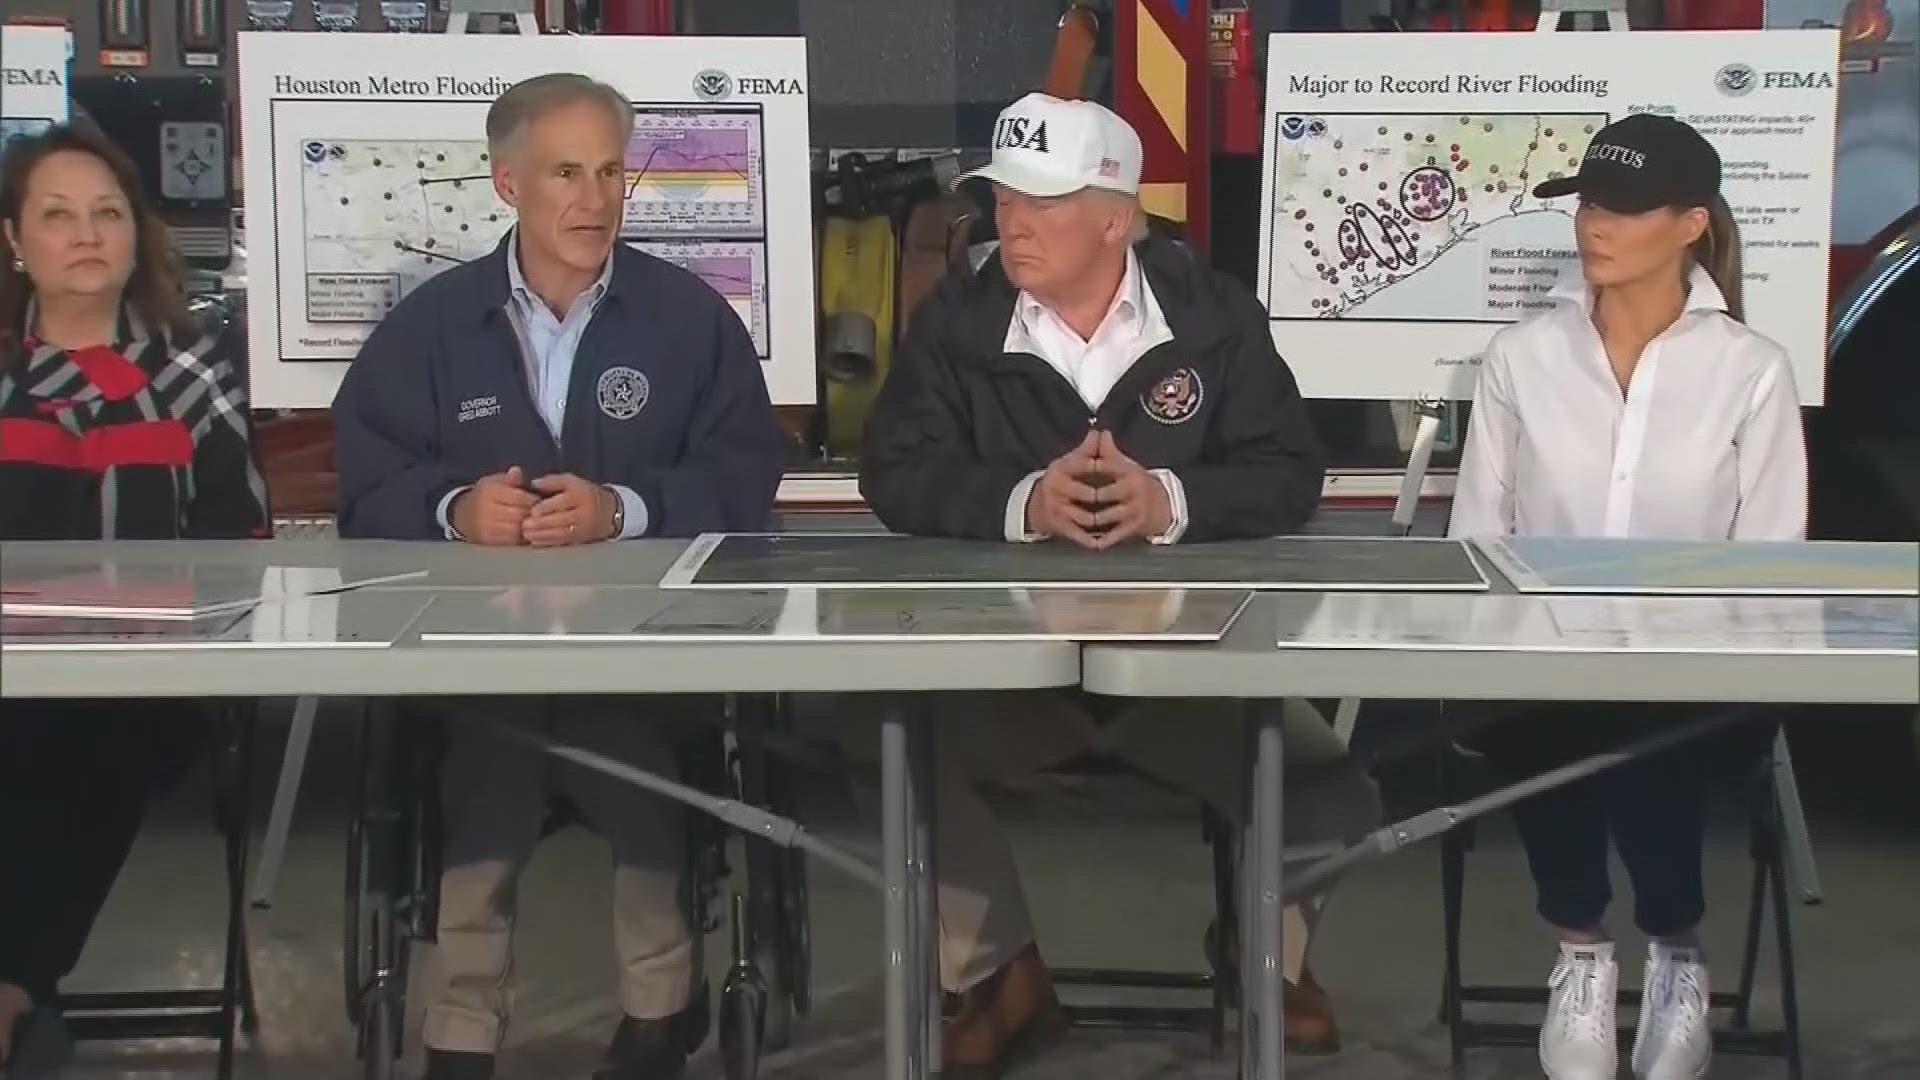 President Trump joined Texas Governor Greg Abbott Tuesday at the Annaville Volunteer Fire Station for a briefing on Hurricane Harvey recovery efforts.